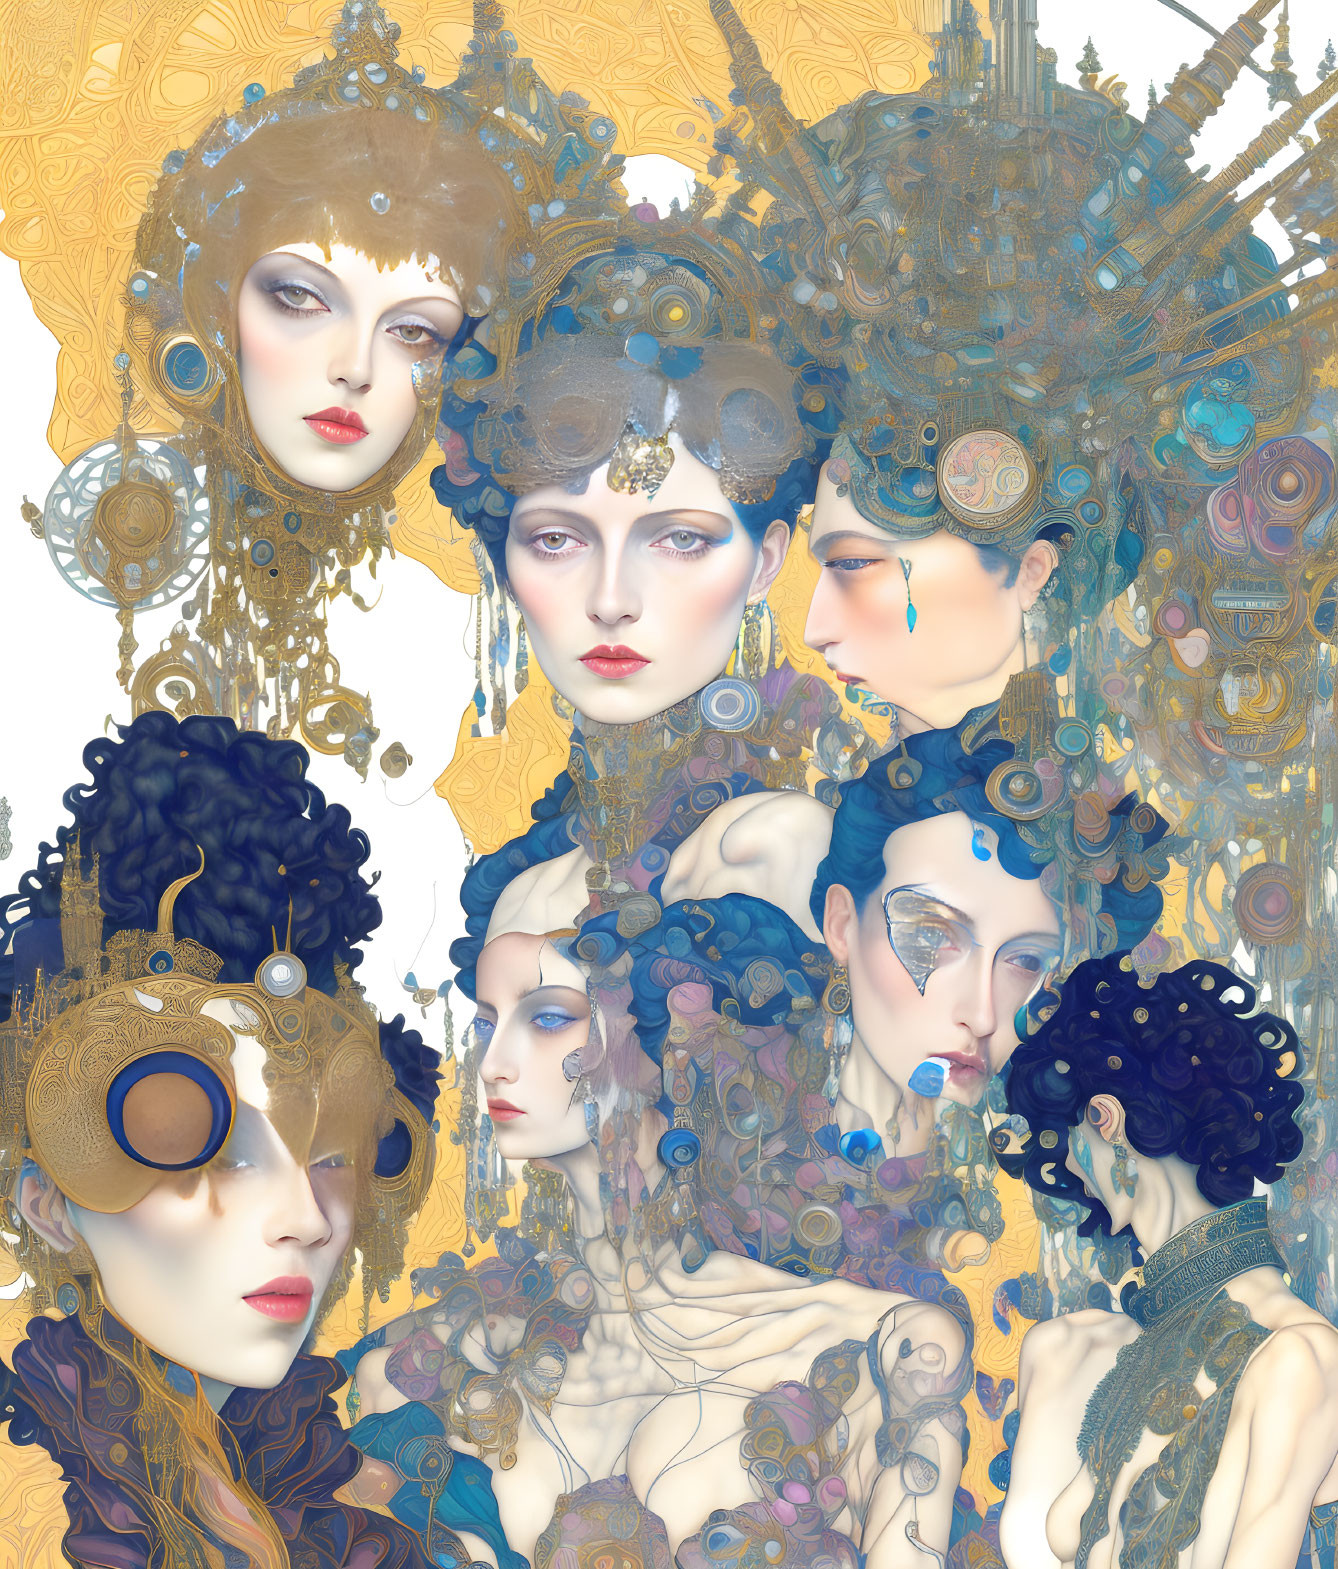 Stylized female figures with ornate headdresses in gold, blue, and cream palette